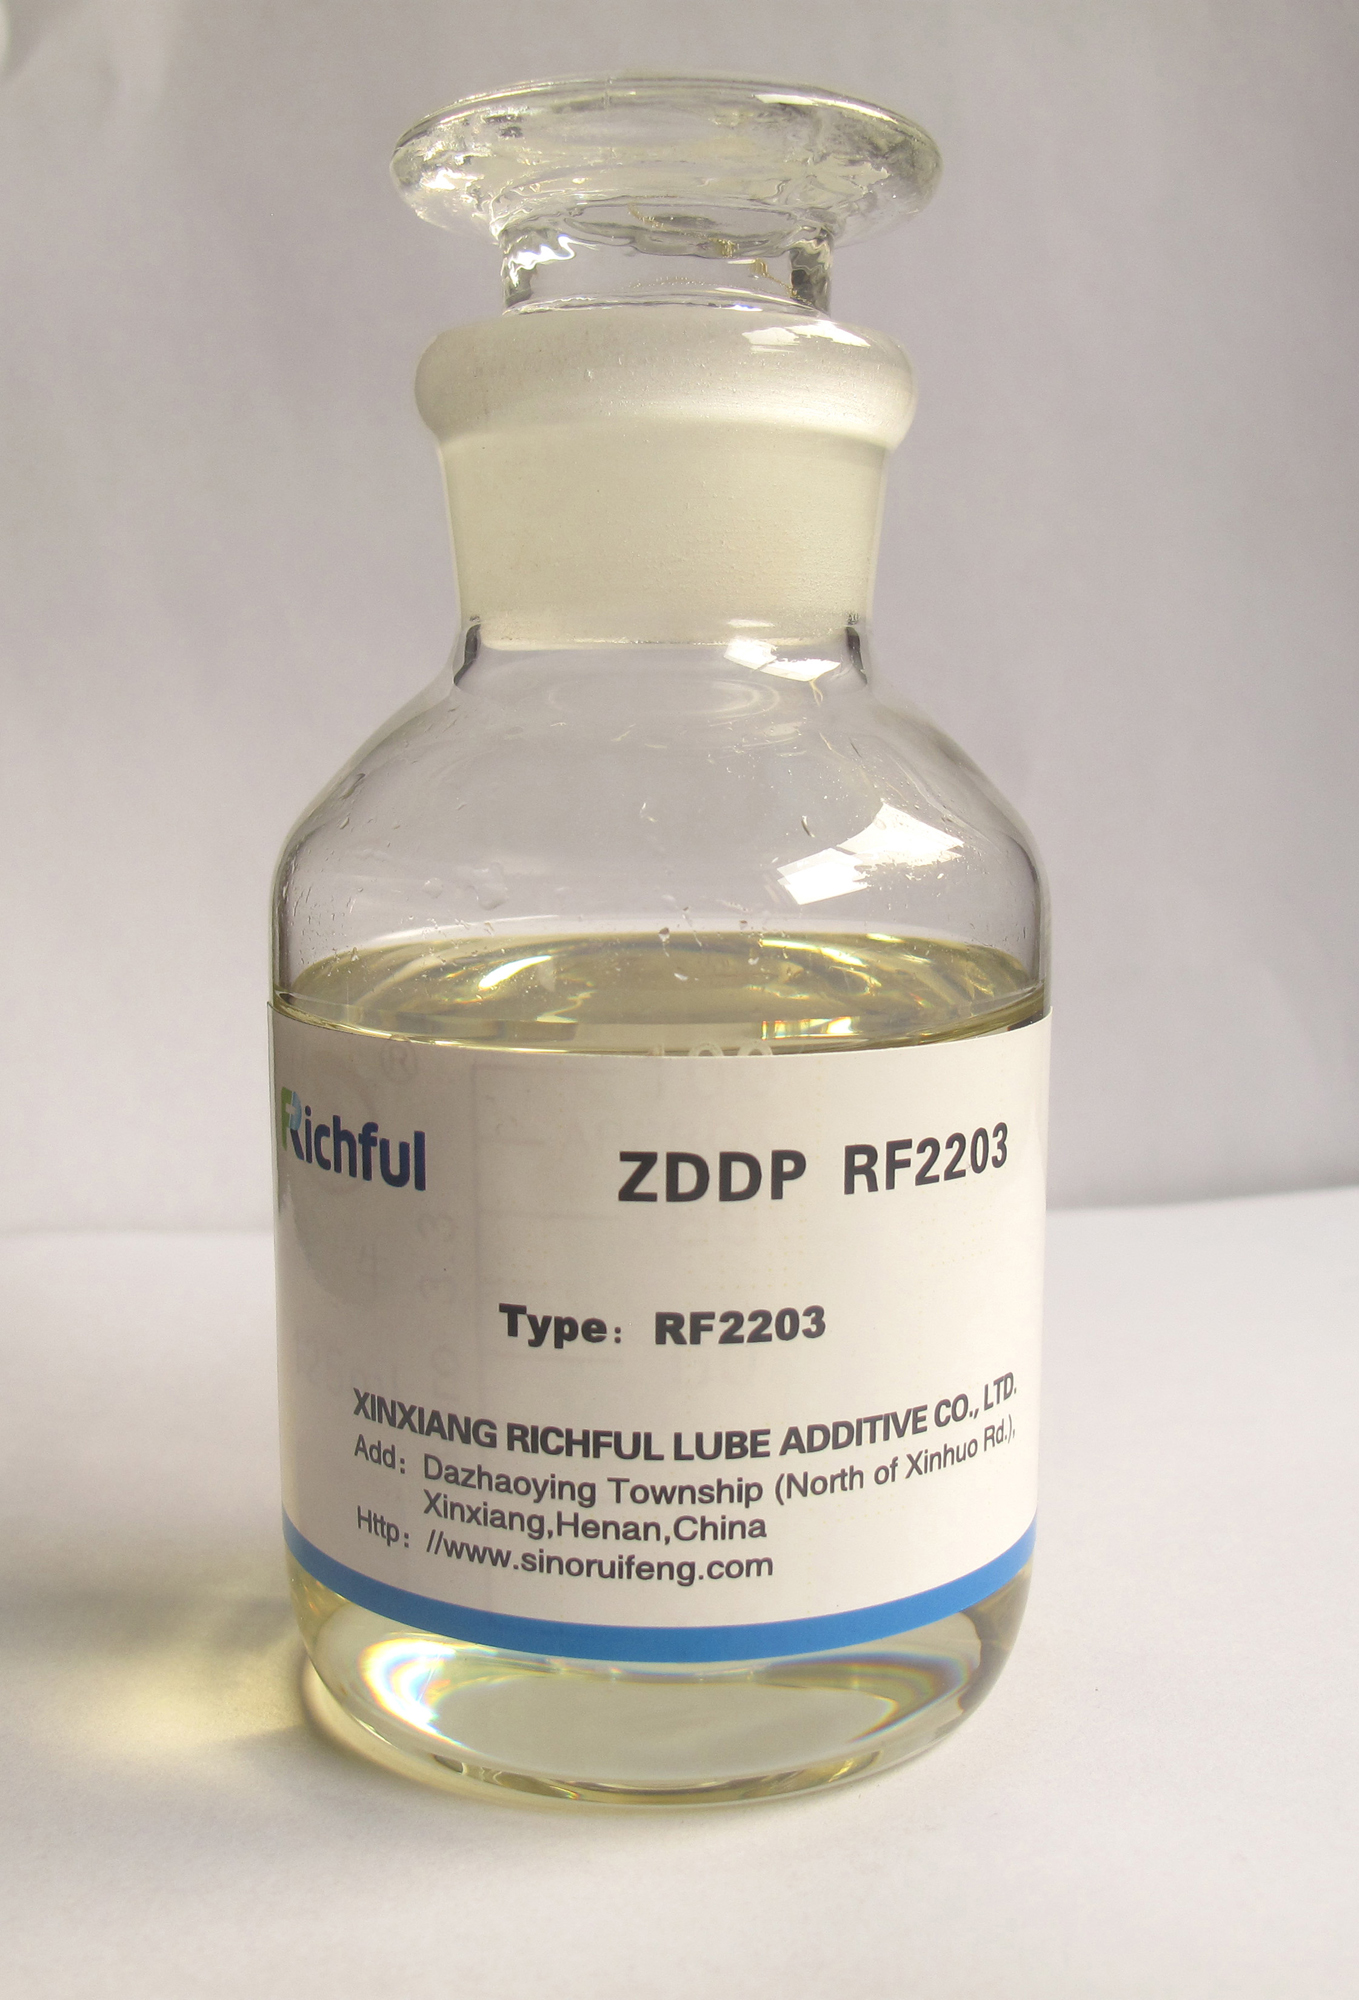 ZDDP Richful Lubricant Additives Antioxidant and Corrosion Inhibitor Zinc Dioctyl Primary Alkyl Dithiophosphate RF2203